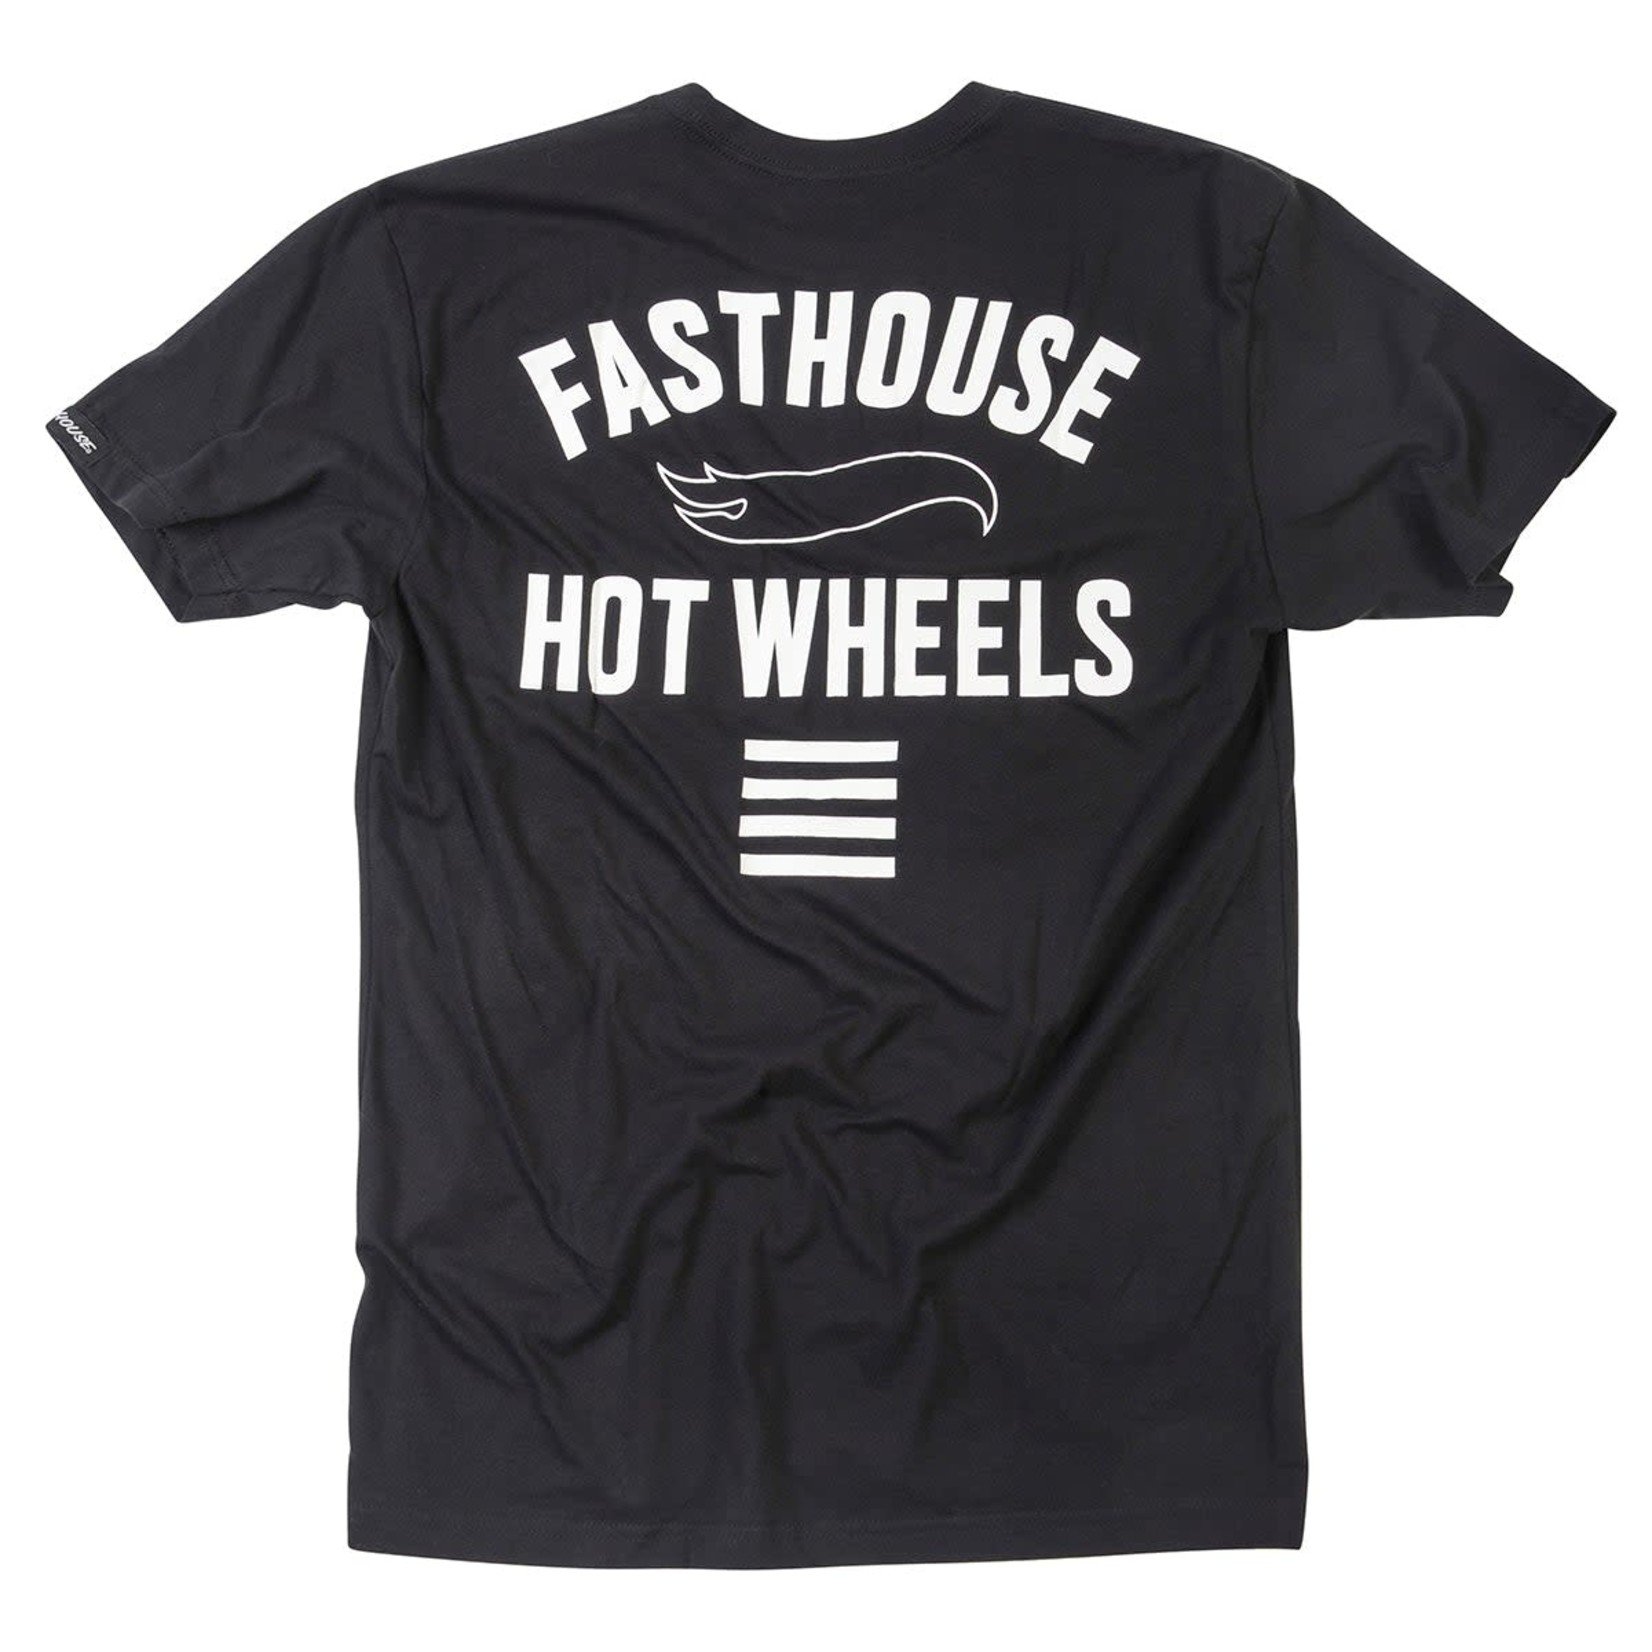 FASTHOUSE Fasthouse Major Hot Wheels Tee, Black